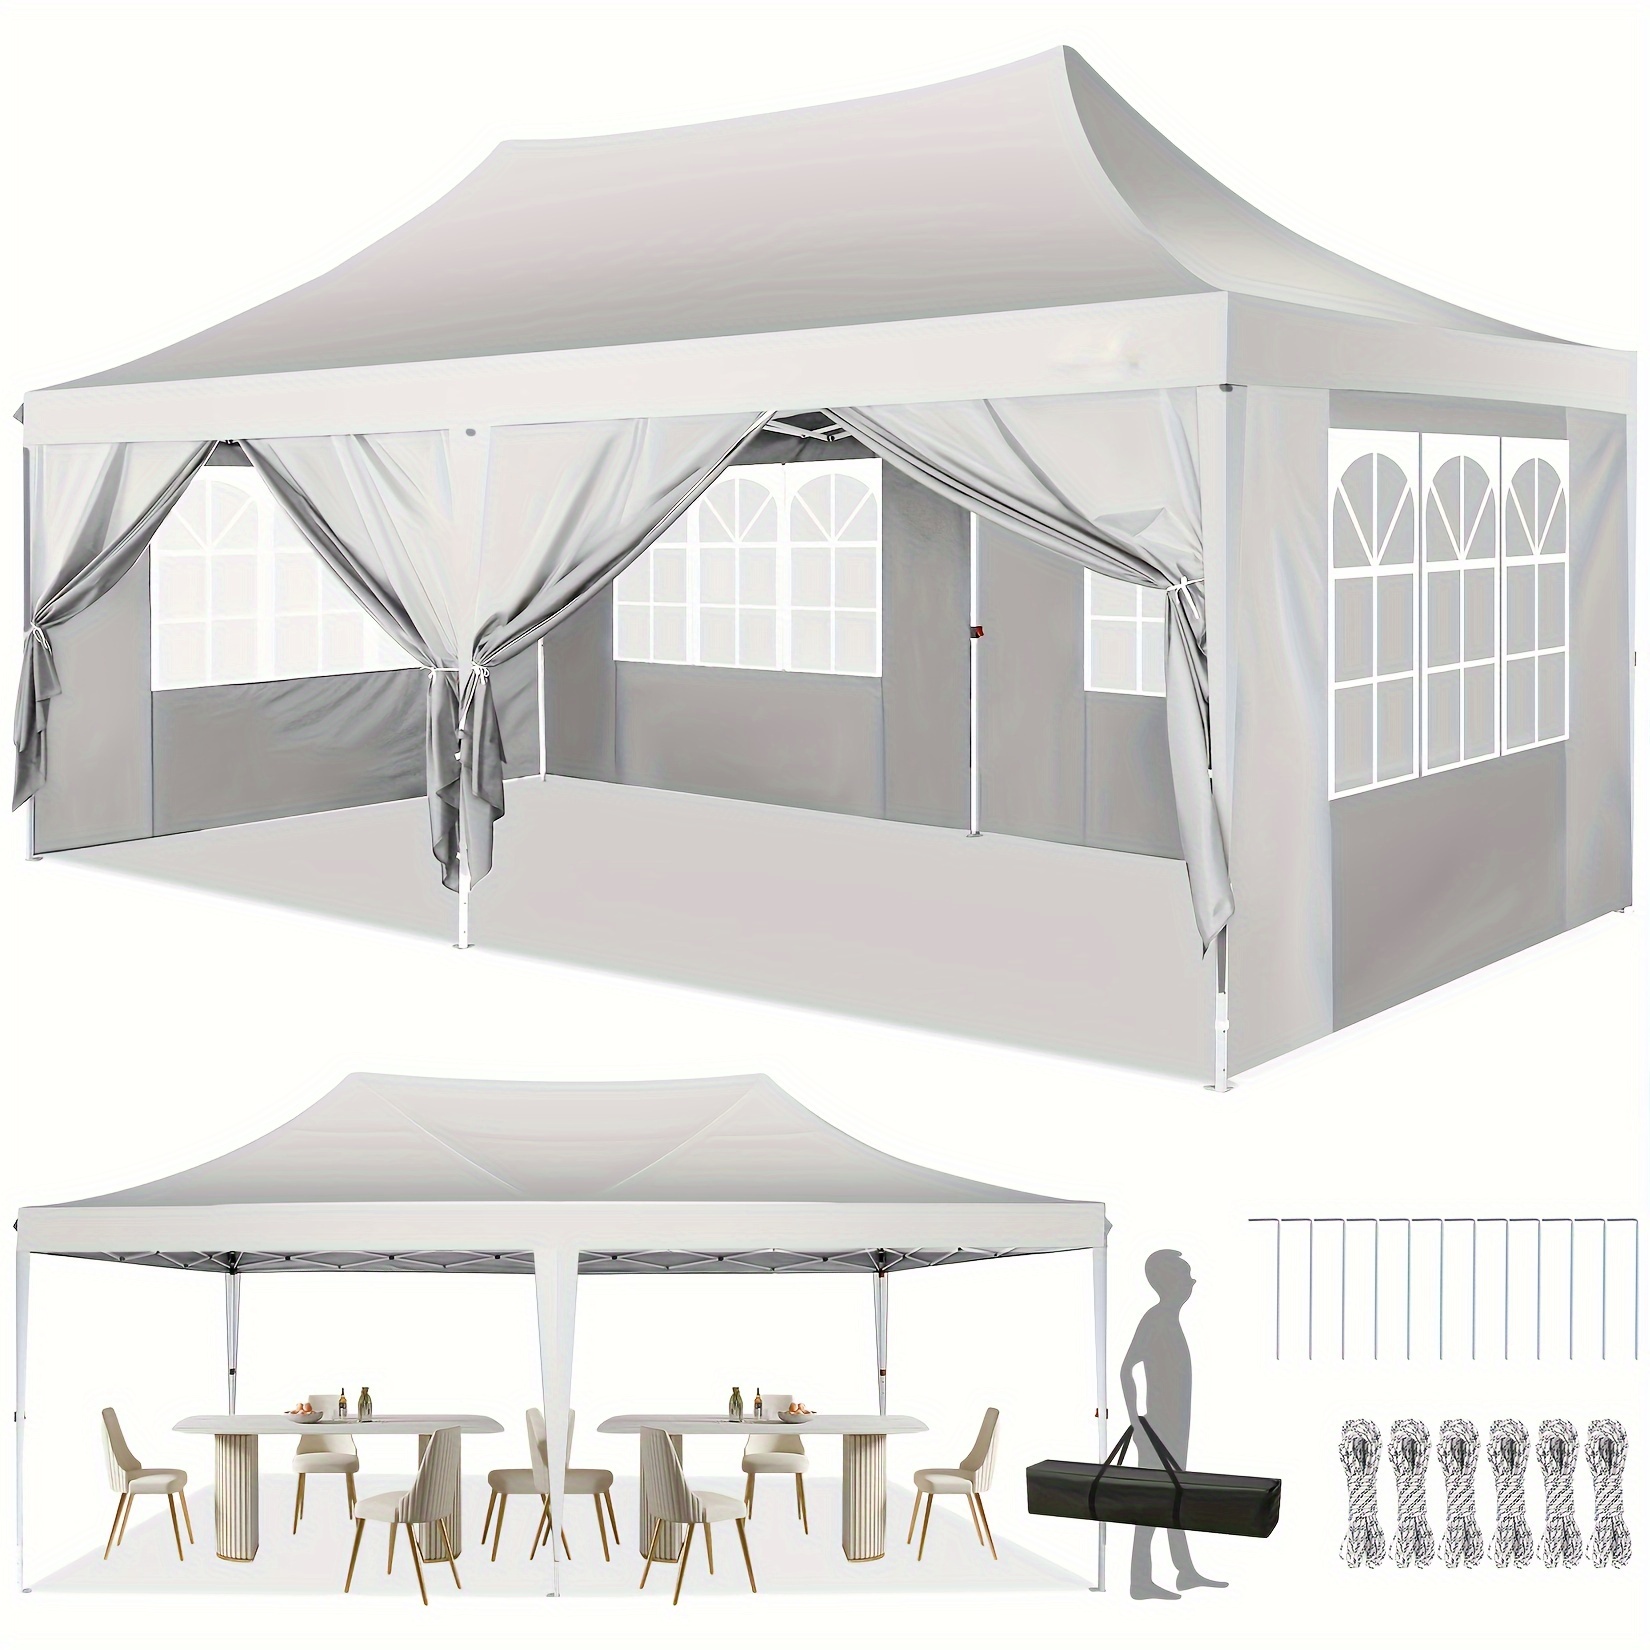 

10x20ft Pop Up Canopy Gazebo, Outdoor Canopy Tent With 6 Removable Sidewalls, For Backyard, Parties, Wedding, White